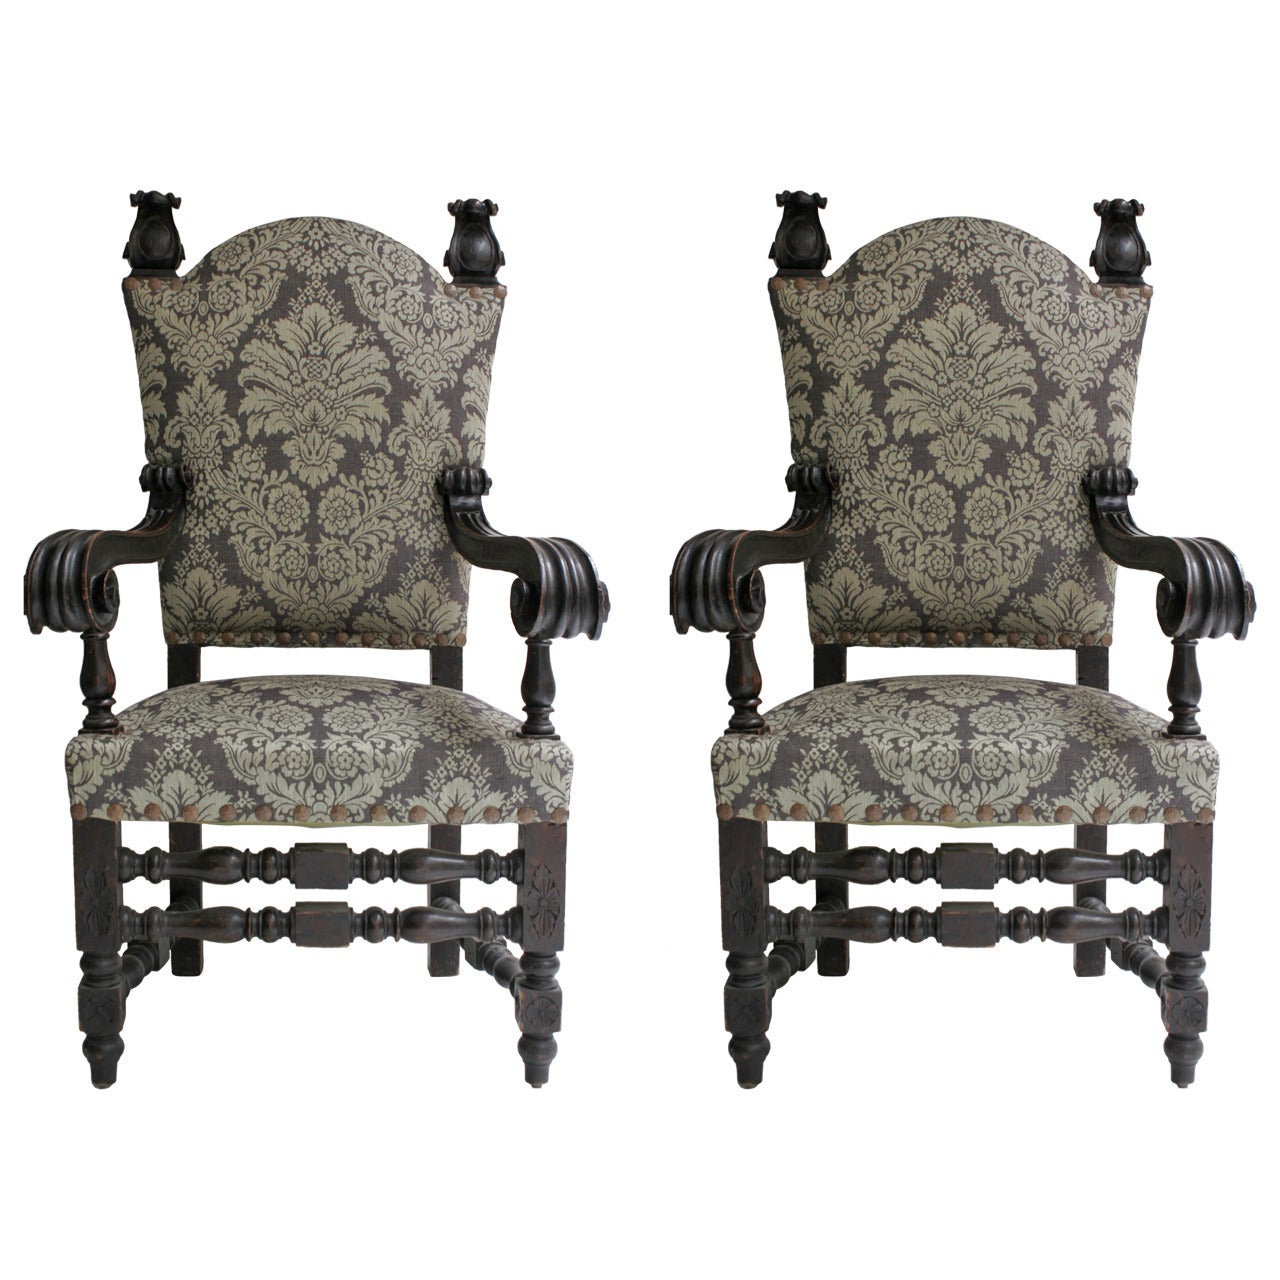 Pair of Armchairs of Spanish Baroque Revival Style, 19th Century For Sale